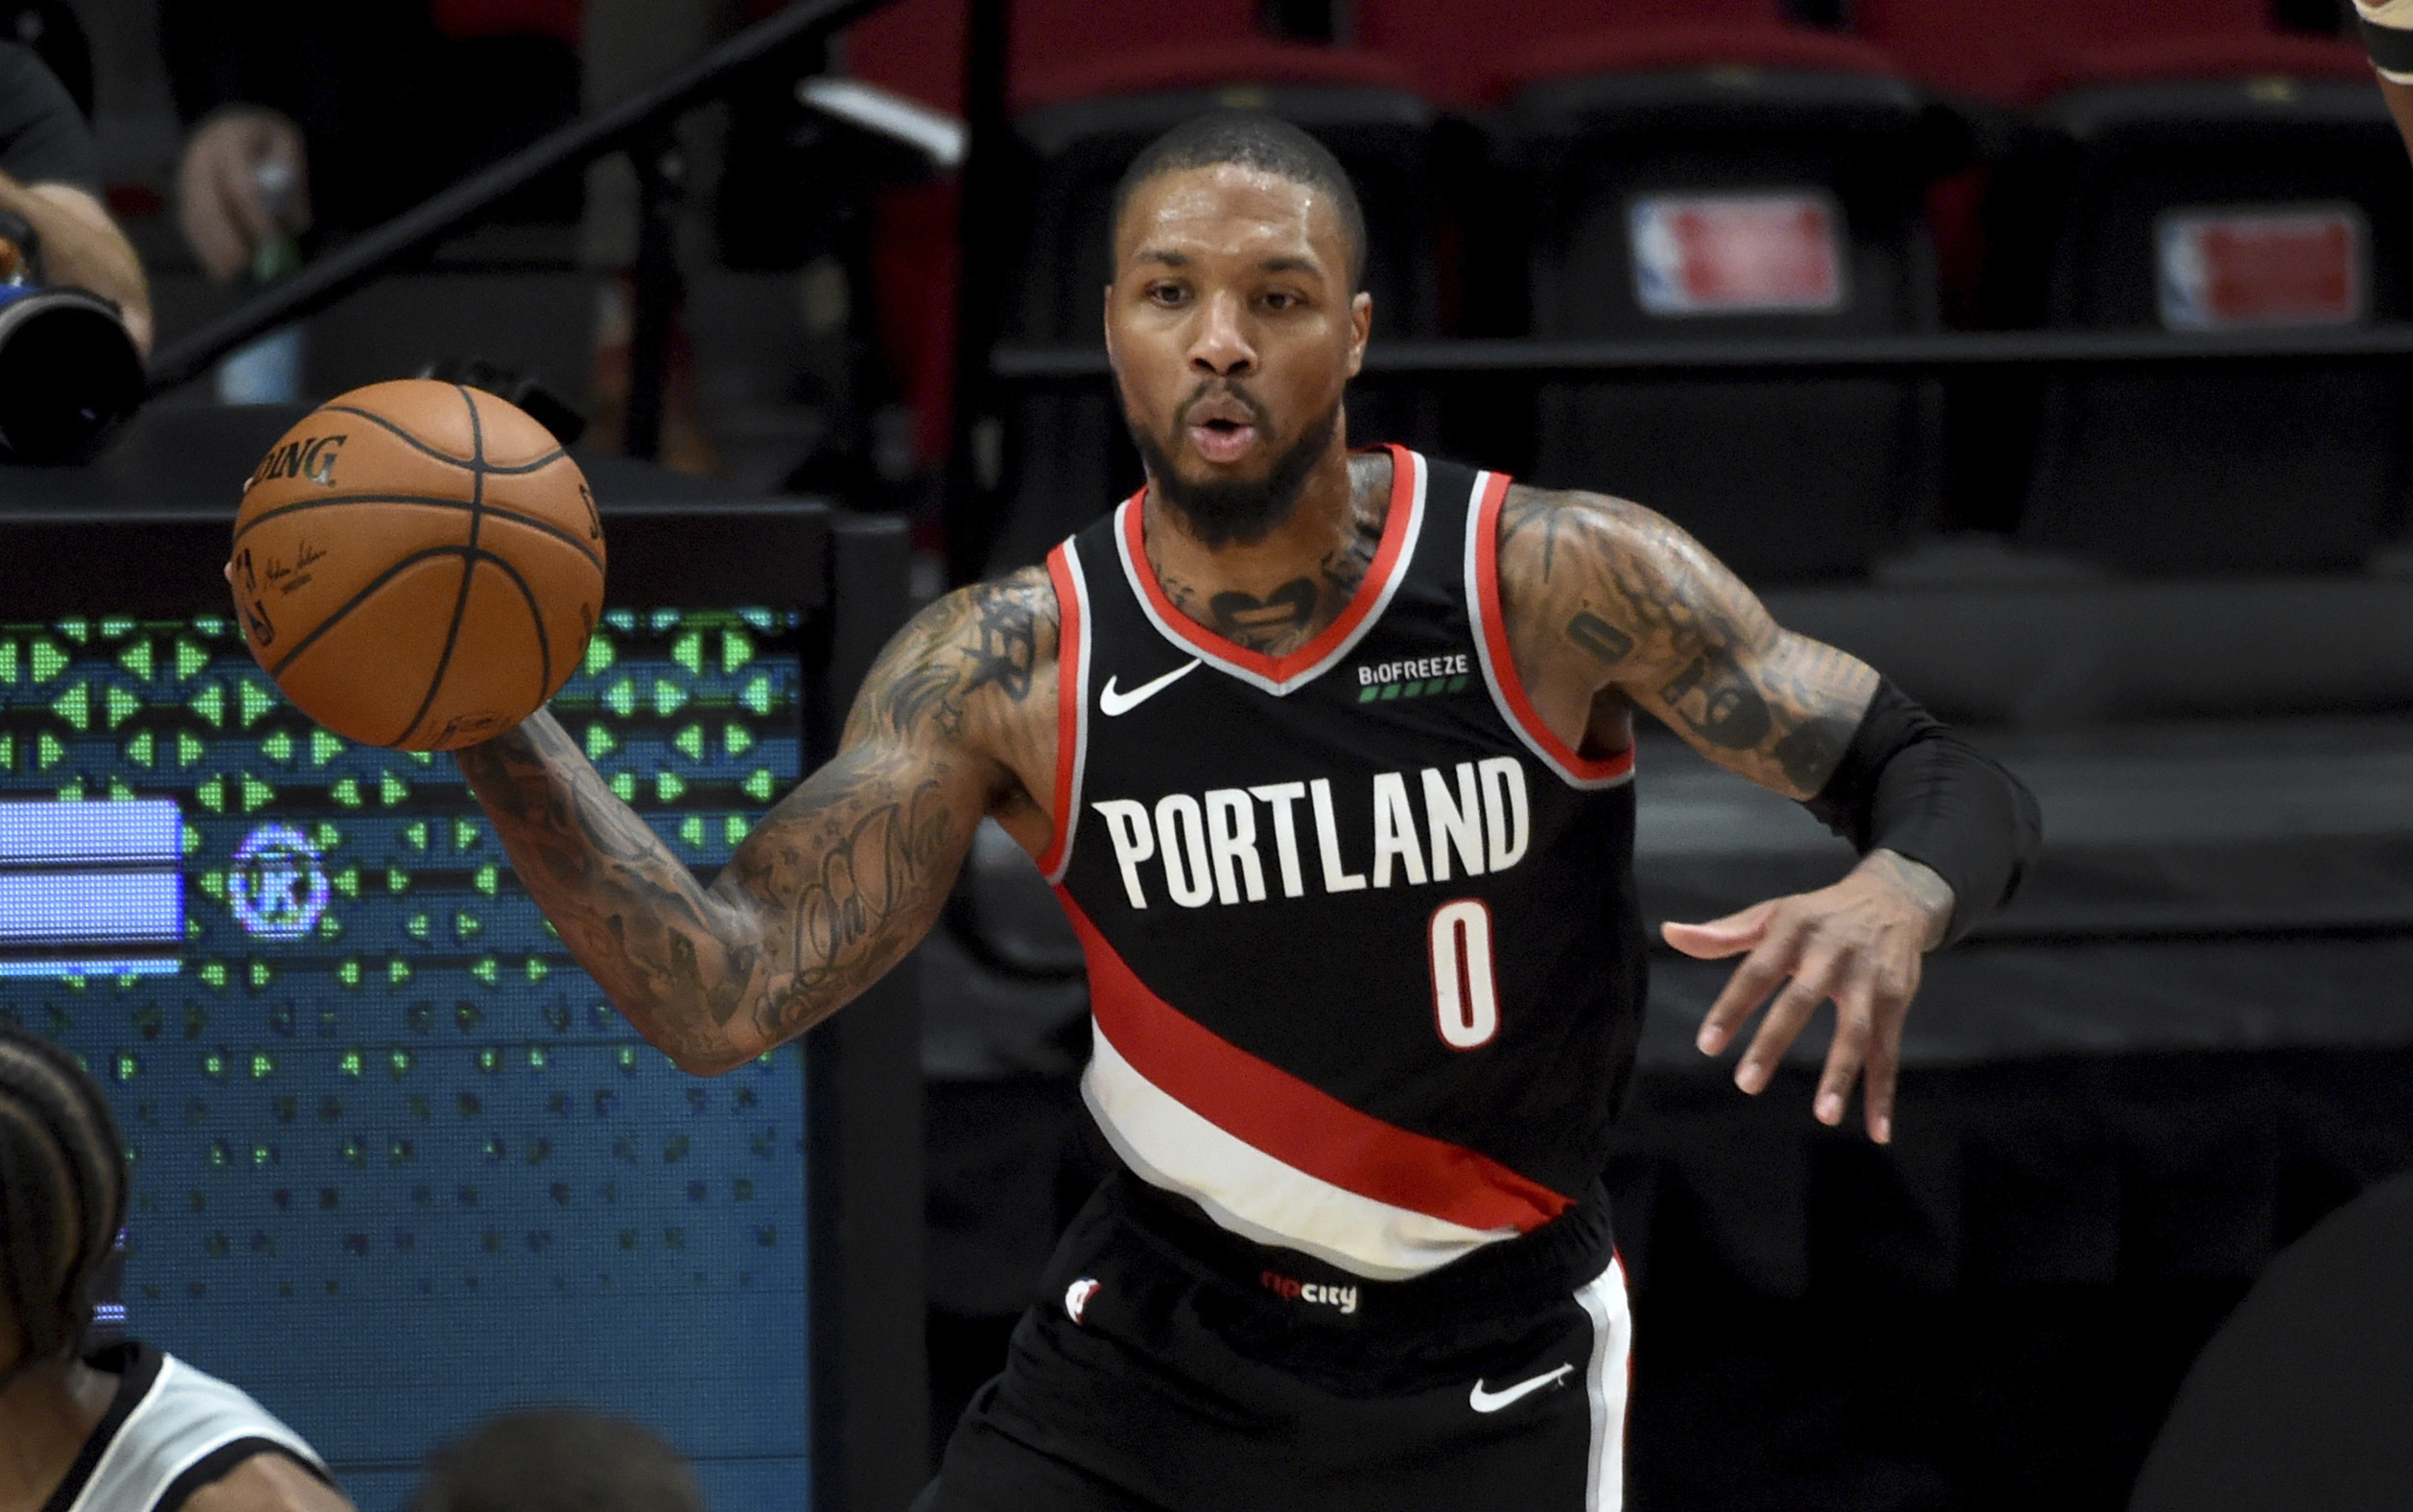 For the fourth season in a row Portland Trail Blazers guard Damian Lillard was named to the All-NBA Team, it was announced Tuesday, June 15, 2021. This is the third time in as many years he earned Second Team honors.